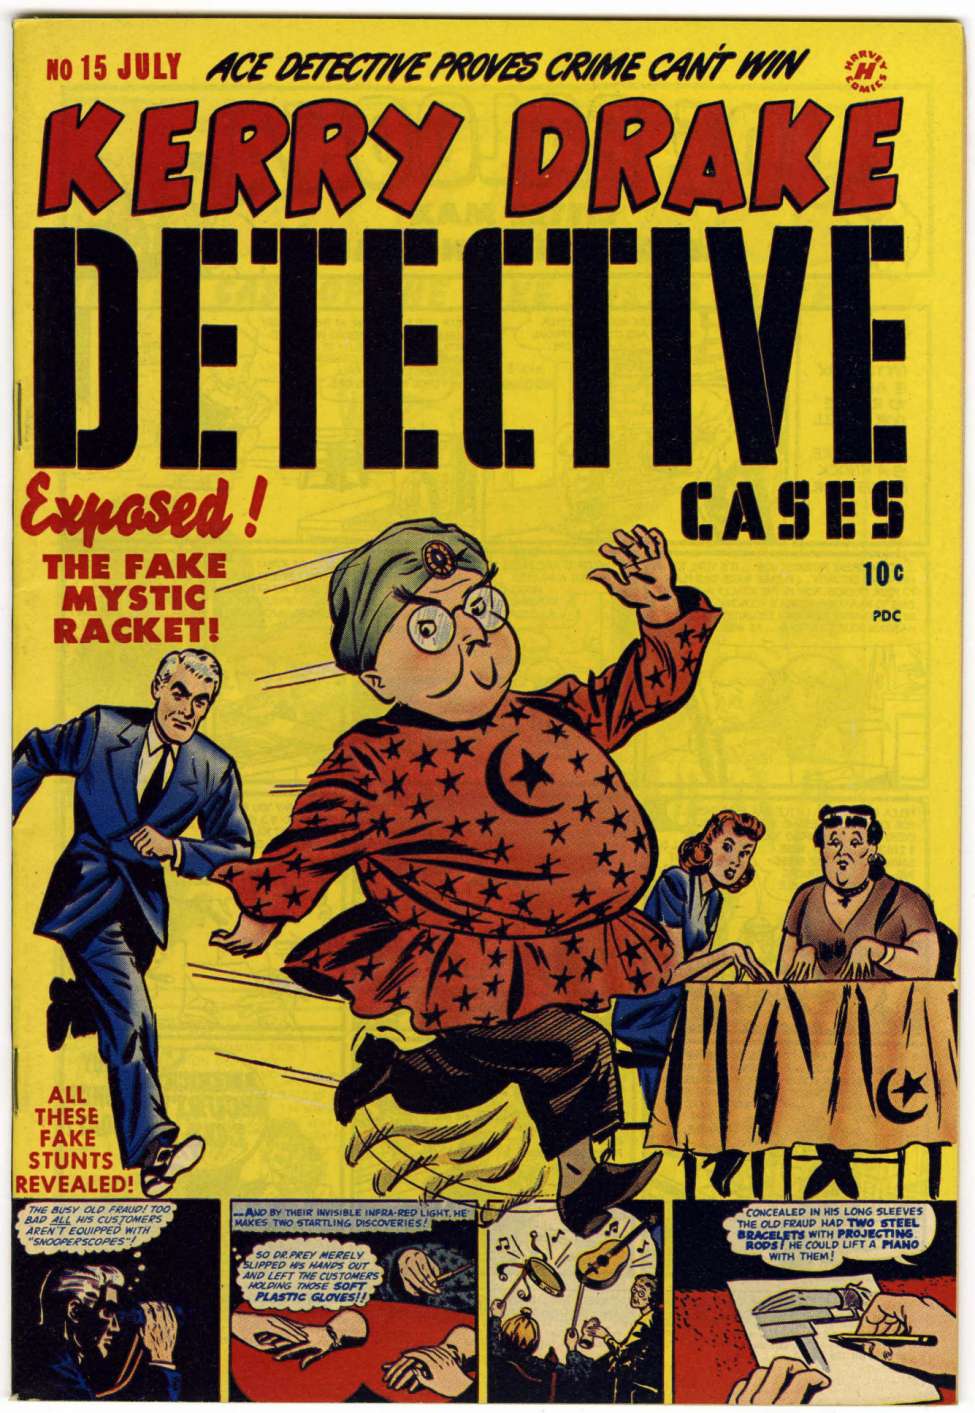 Book Cover For Kerry Drake Detective Cases 15